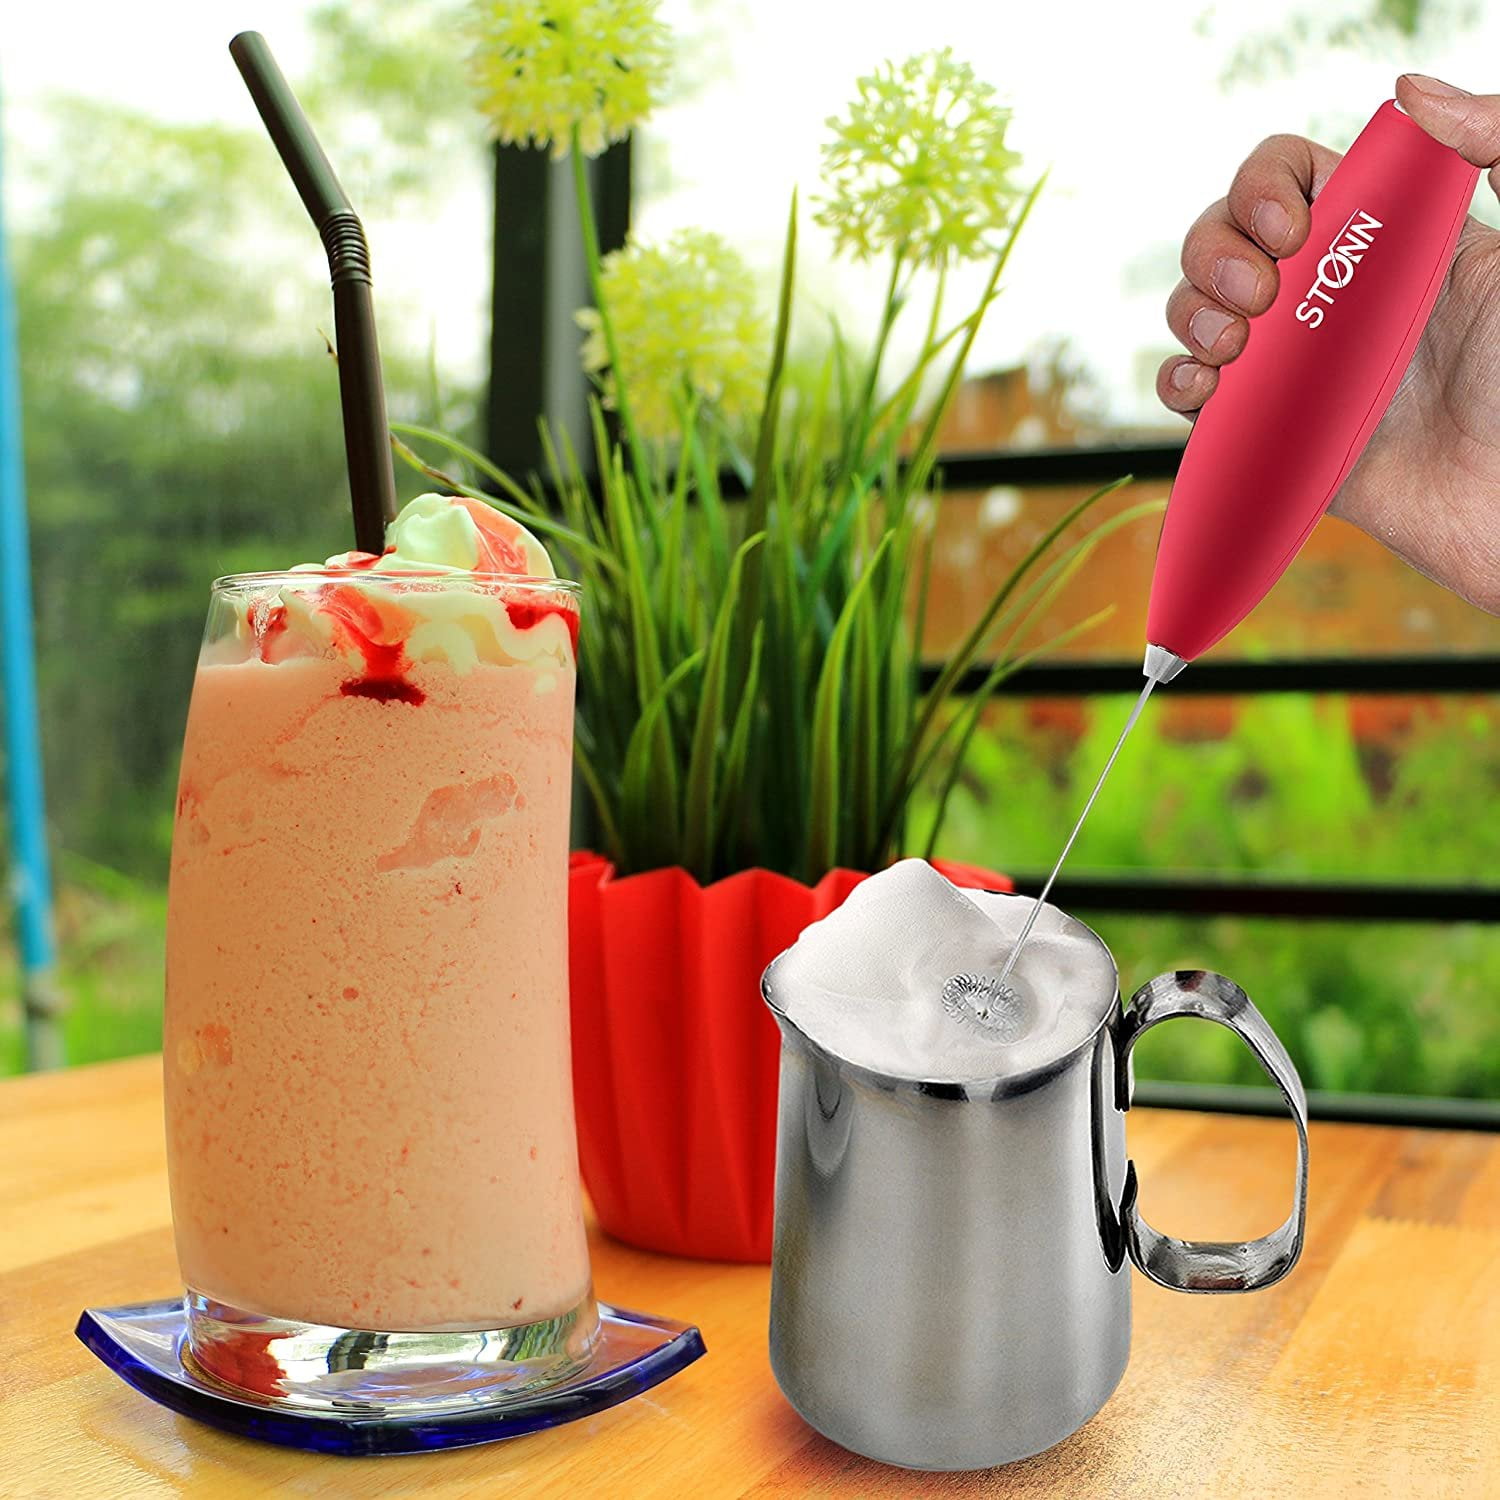 HeTian Handheld Electric Milk Frother, Battery Operated Froth